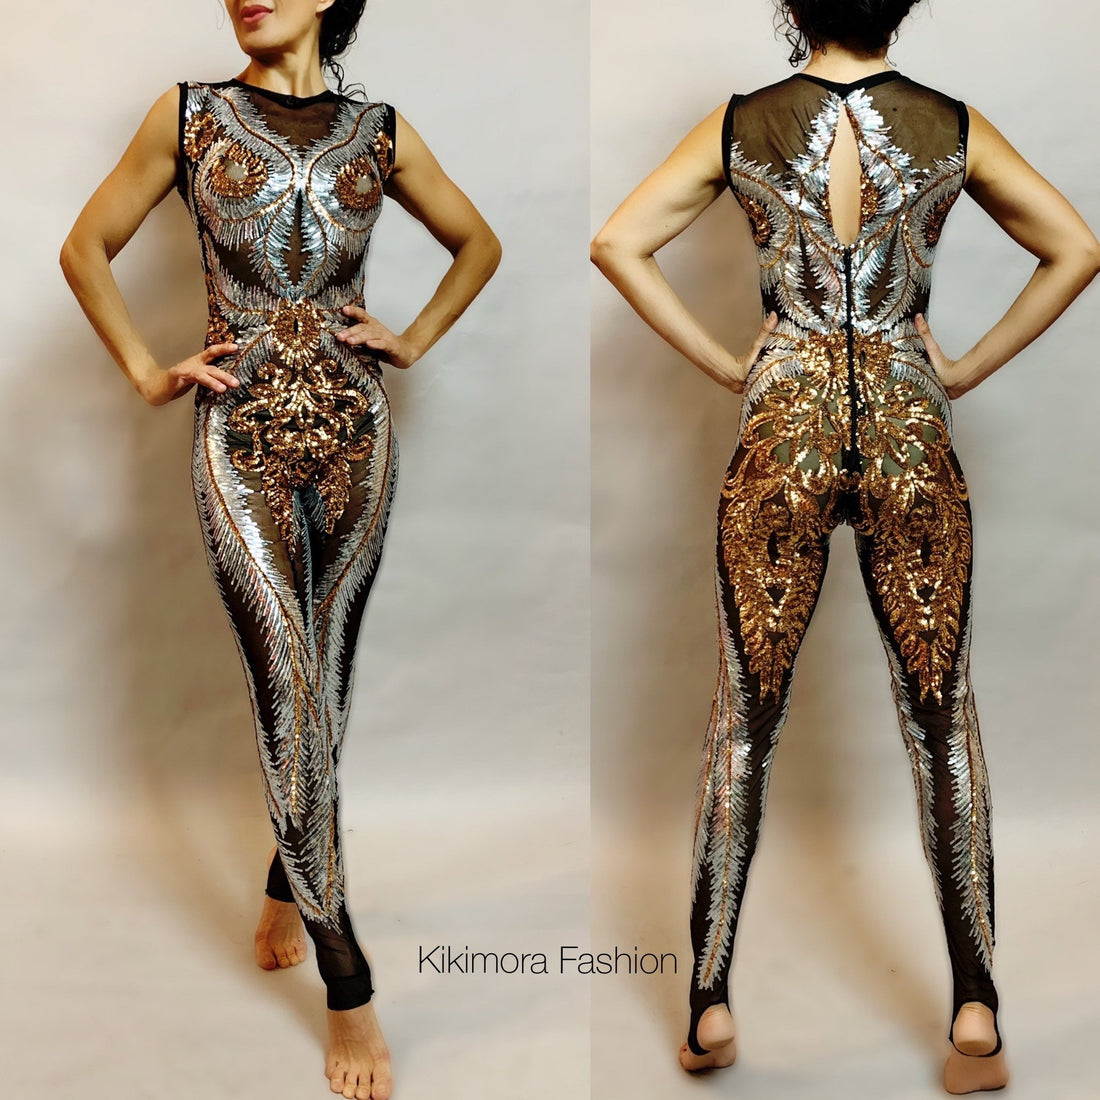 Showgirl Costume, Sequin Bodysuit for Women or Men, Shiny, Beautiful Contortionist Costume, Personalized Dressing Gown